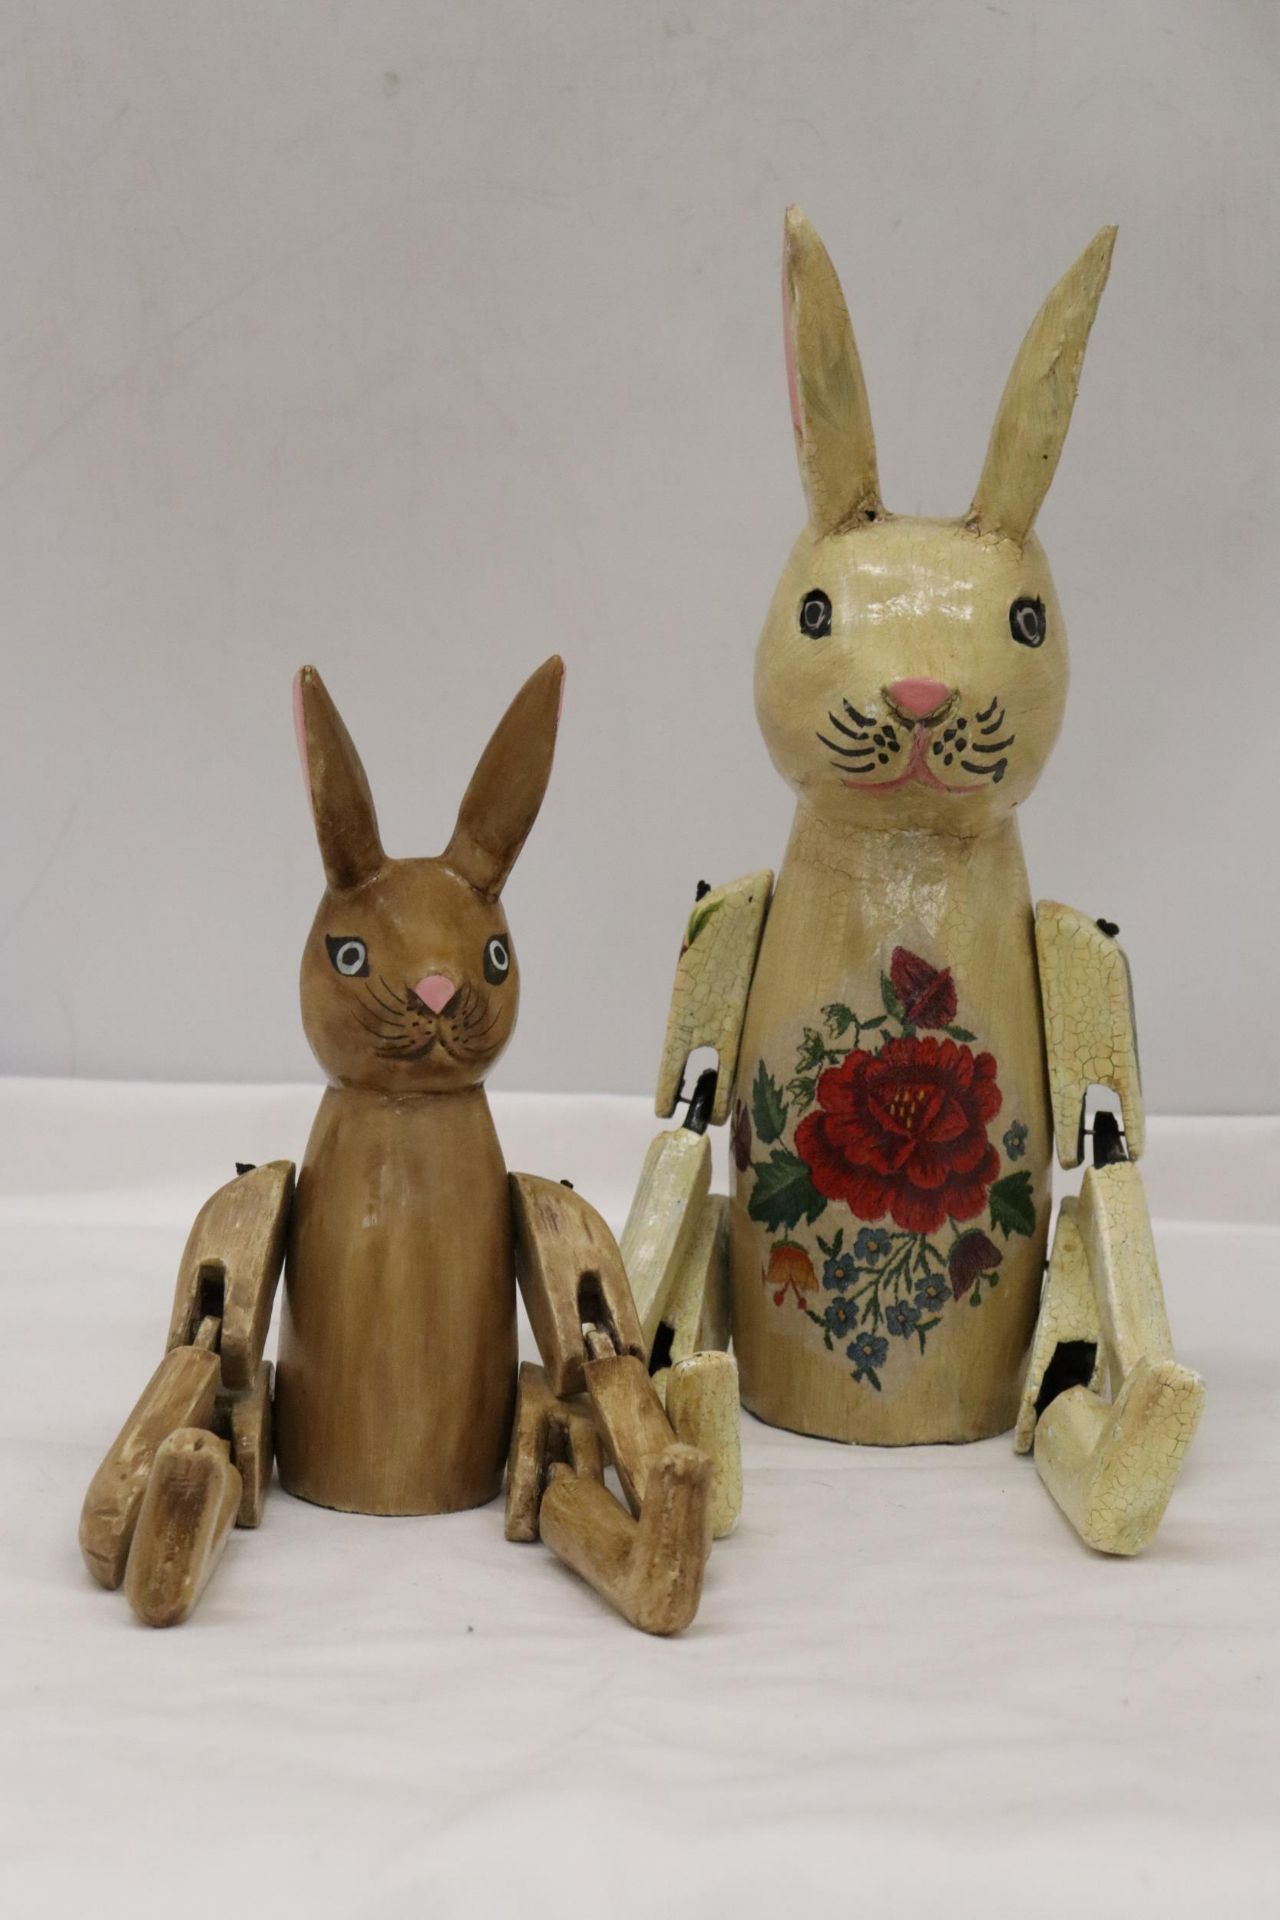 TWO WOODEN SHELF RABBITS - Image 6 of 6